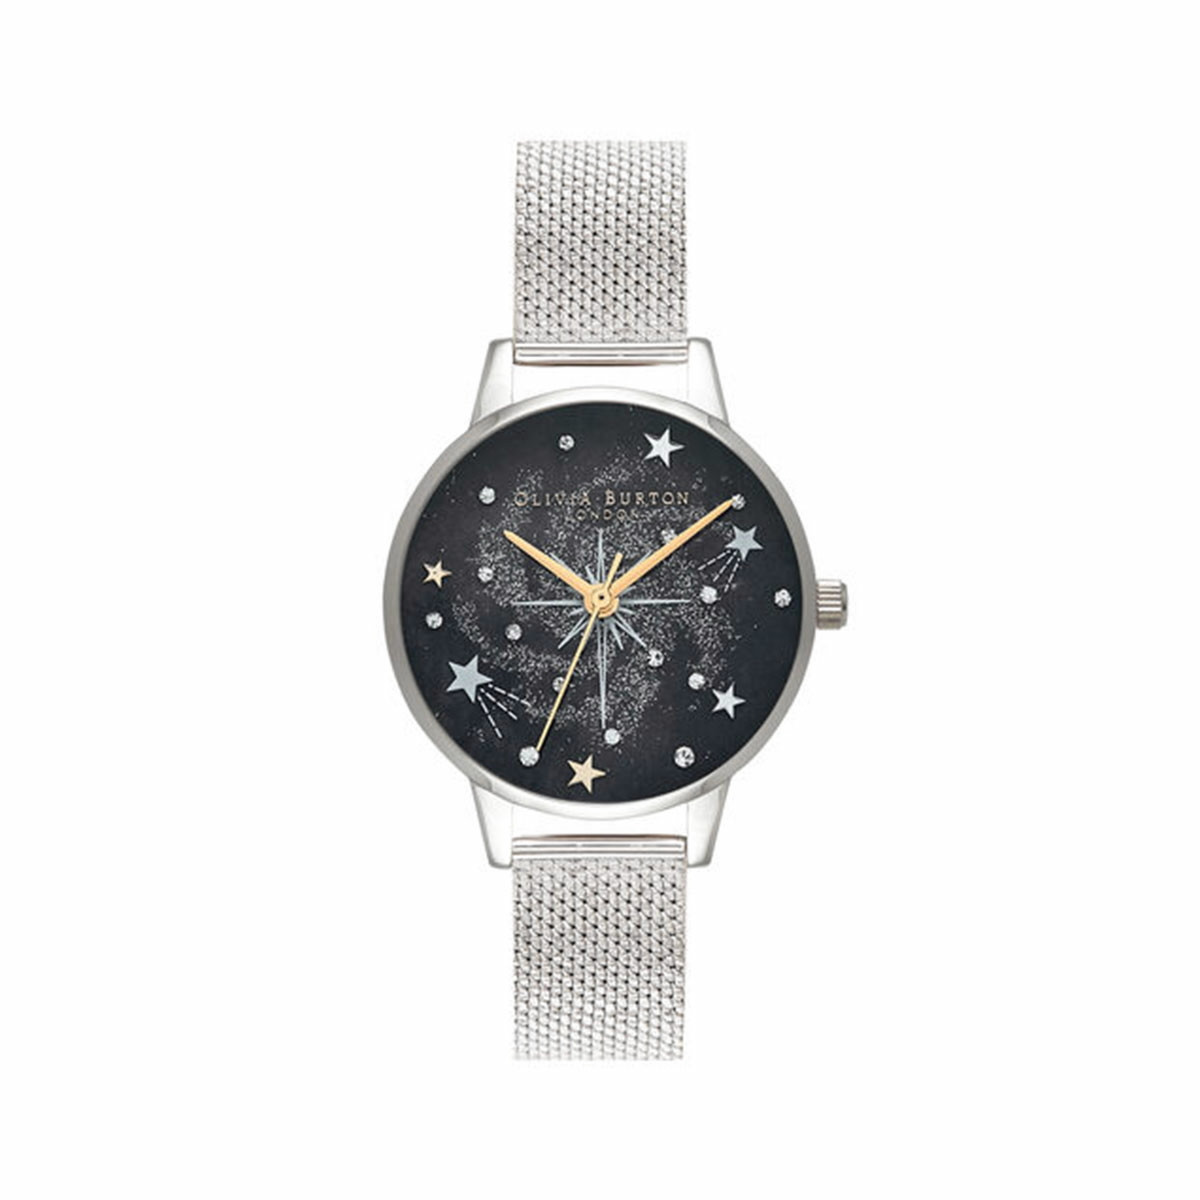 SILVER PLATED MESH WATCH WITH CELESTIAL MIDI DIAL